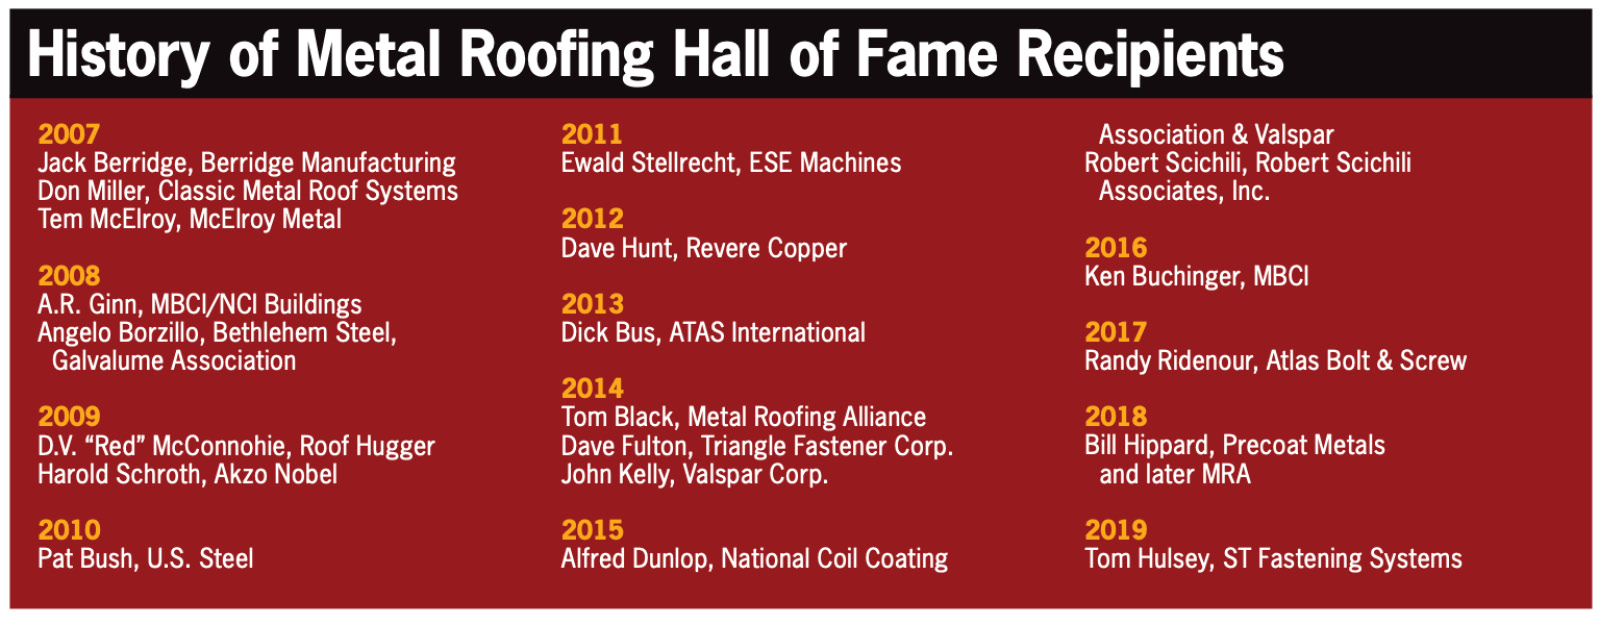 Metal Roofing Hall of Fame